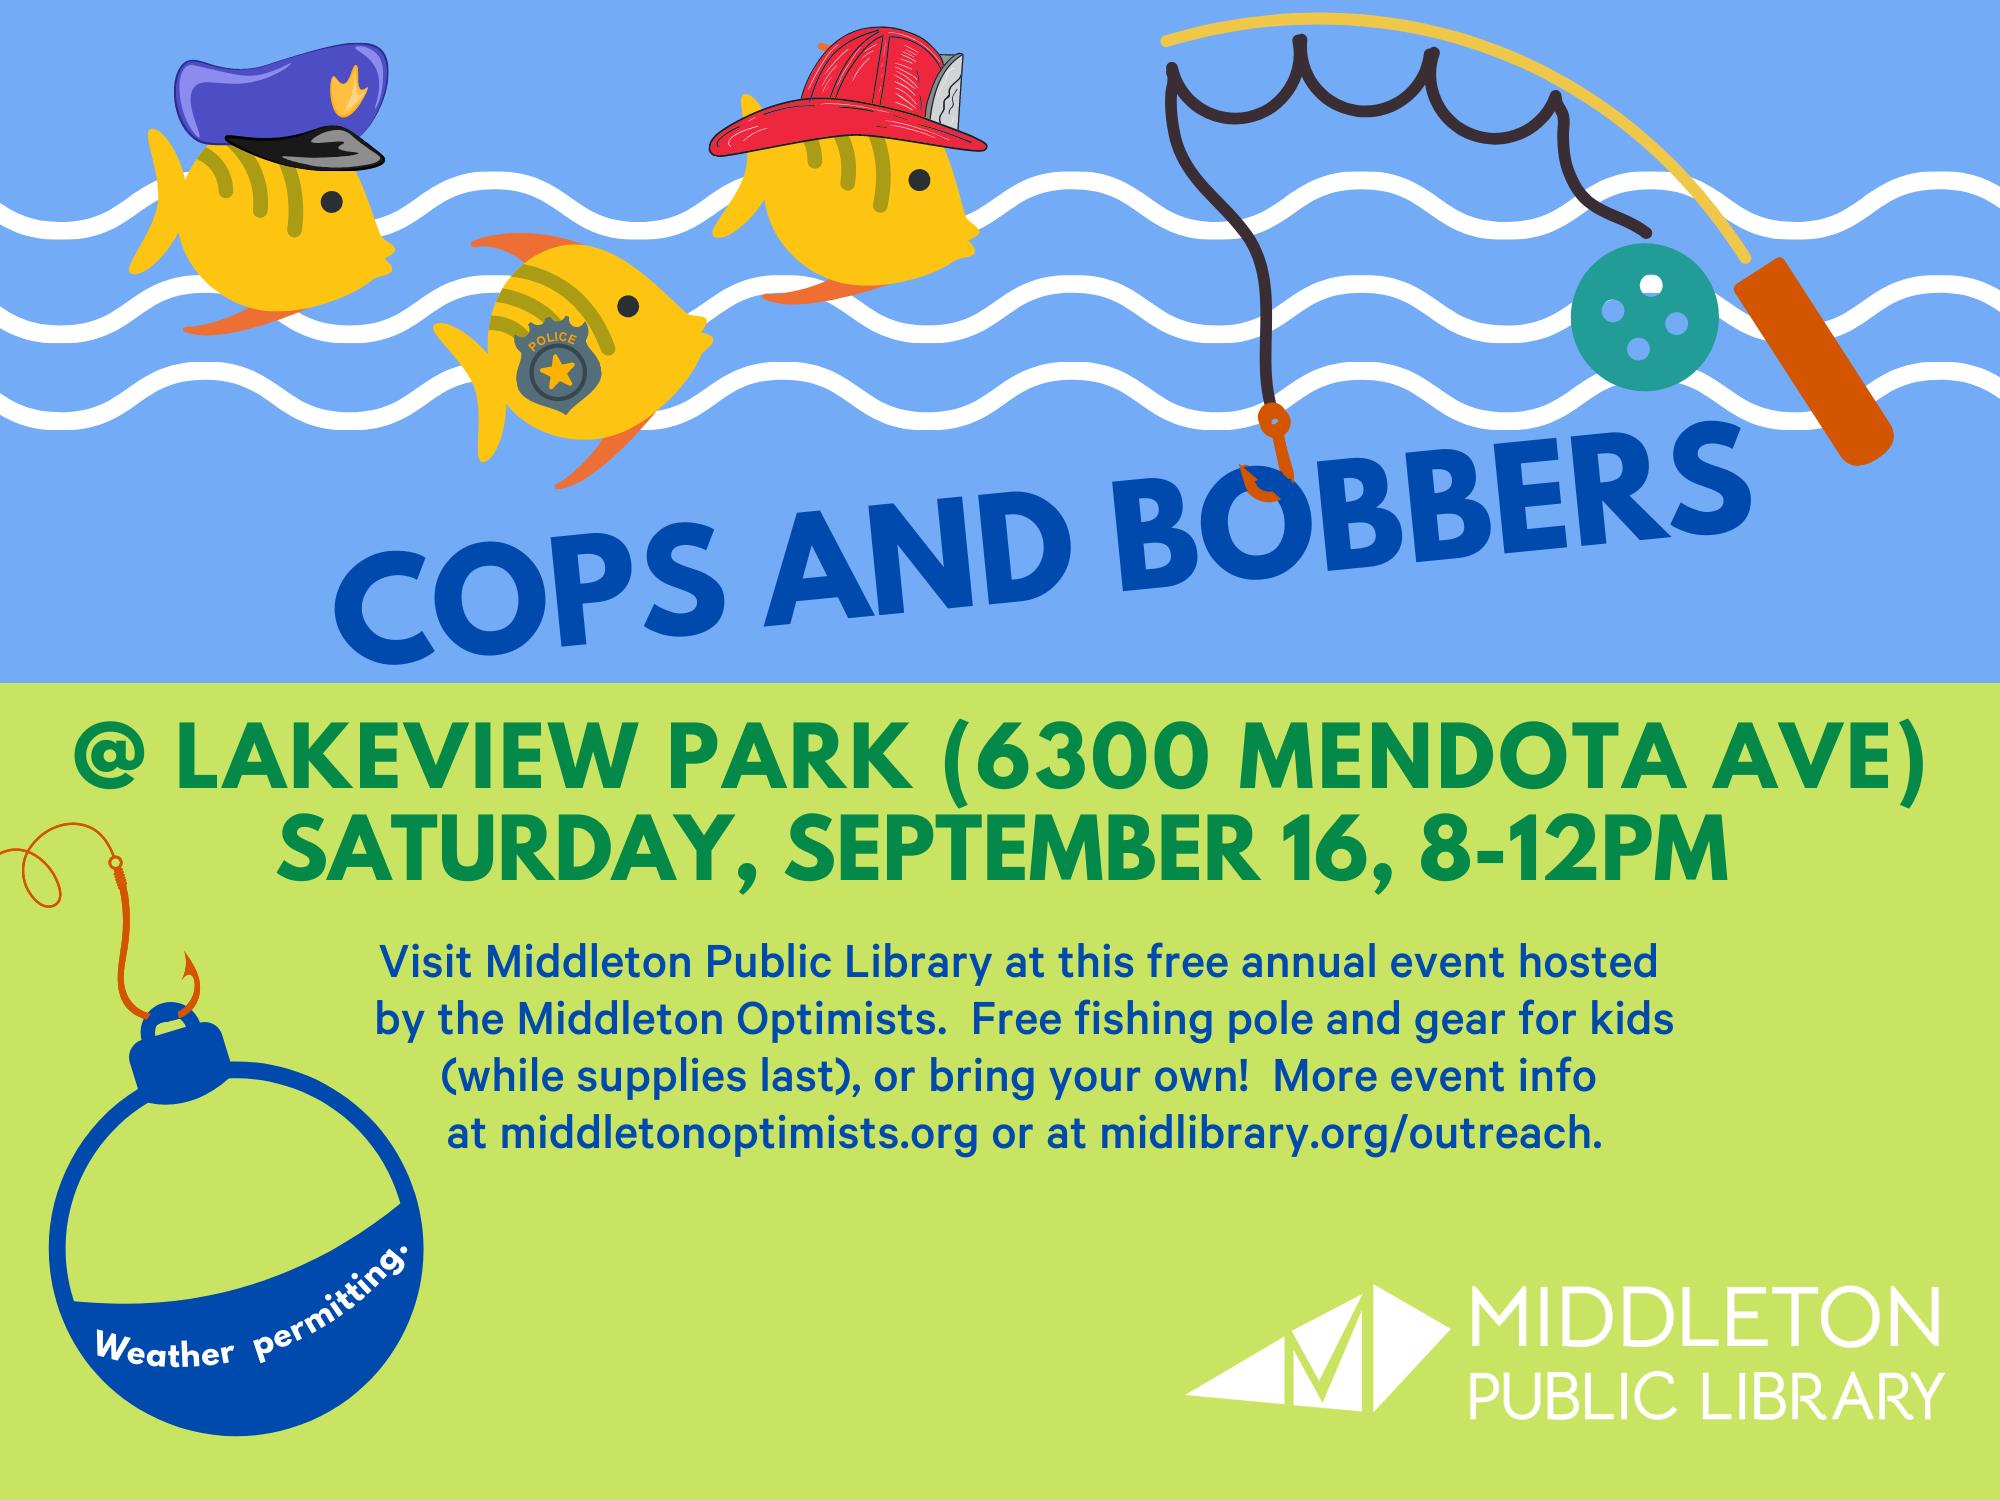 cops and bobbers at lakeview park.